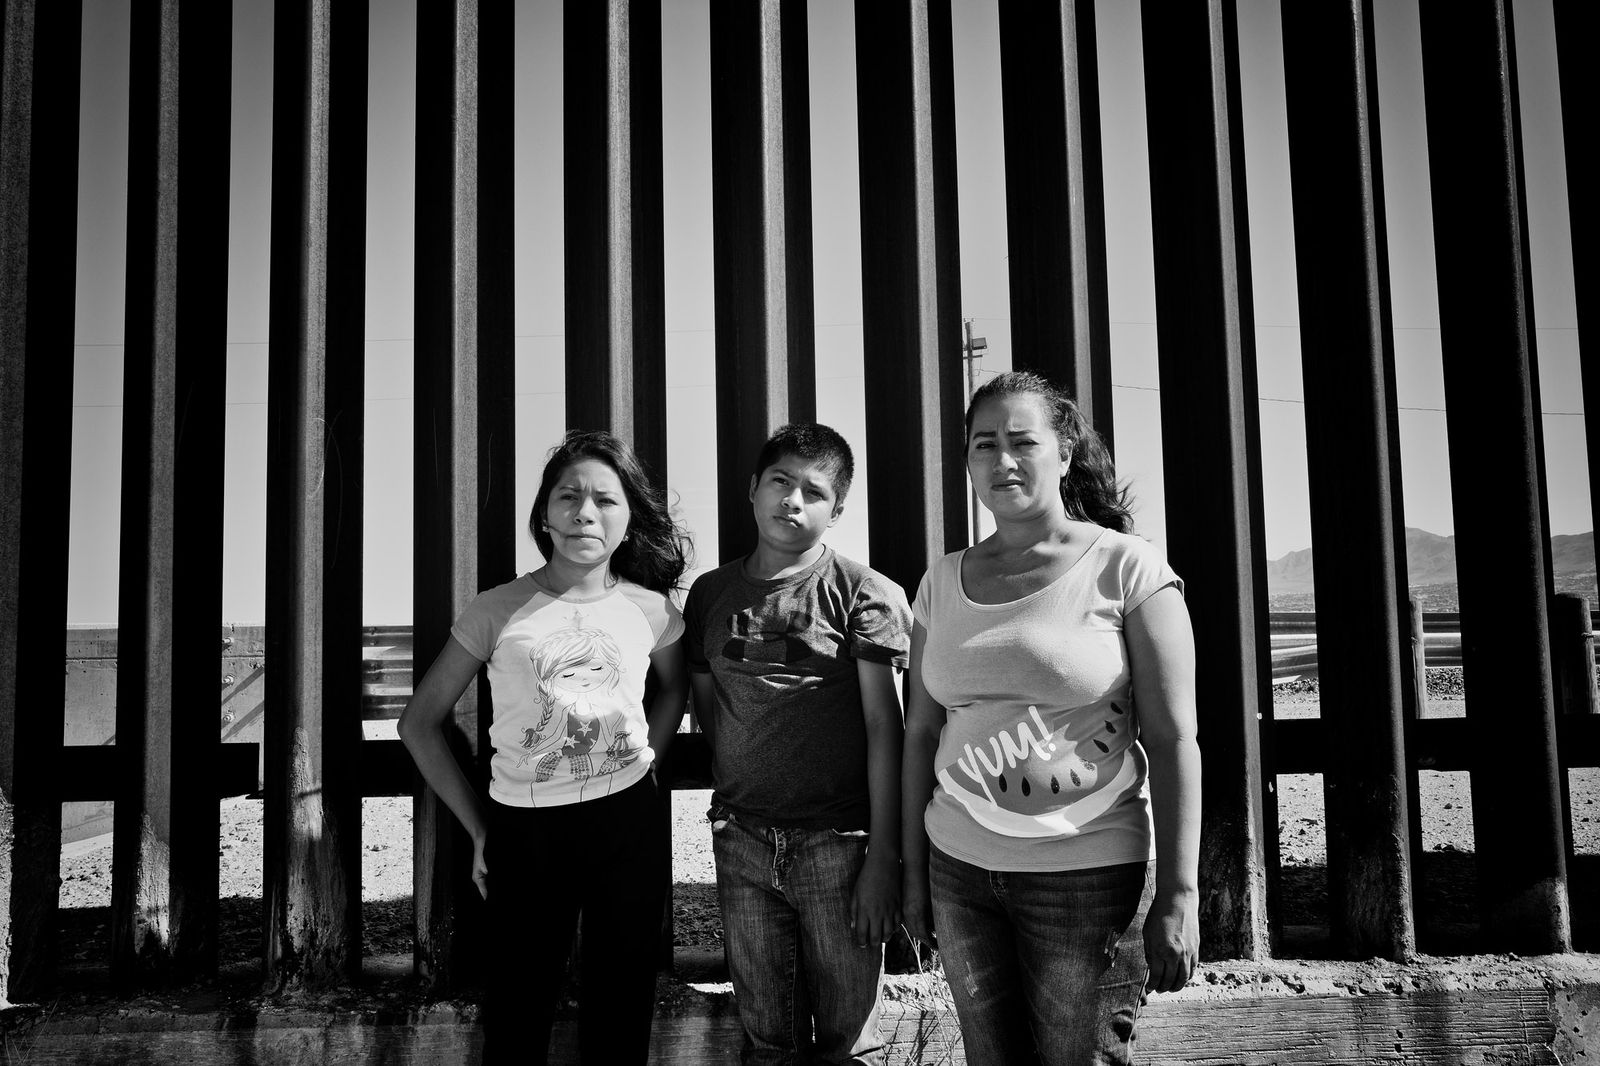 © Ada Trillo - Image from the If Walls Could Speak: Asylum seekers forced to wait in Mexico. photography project